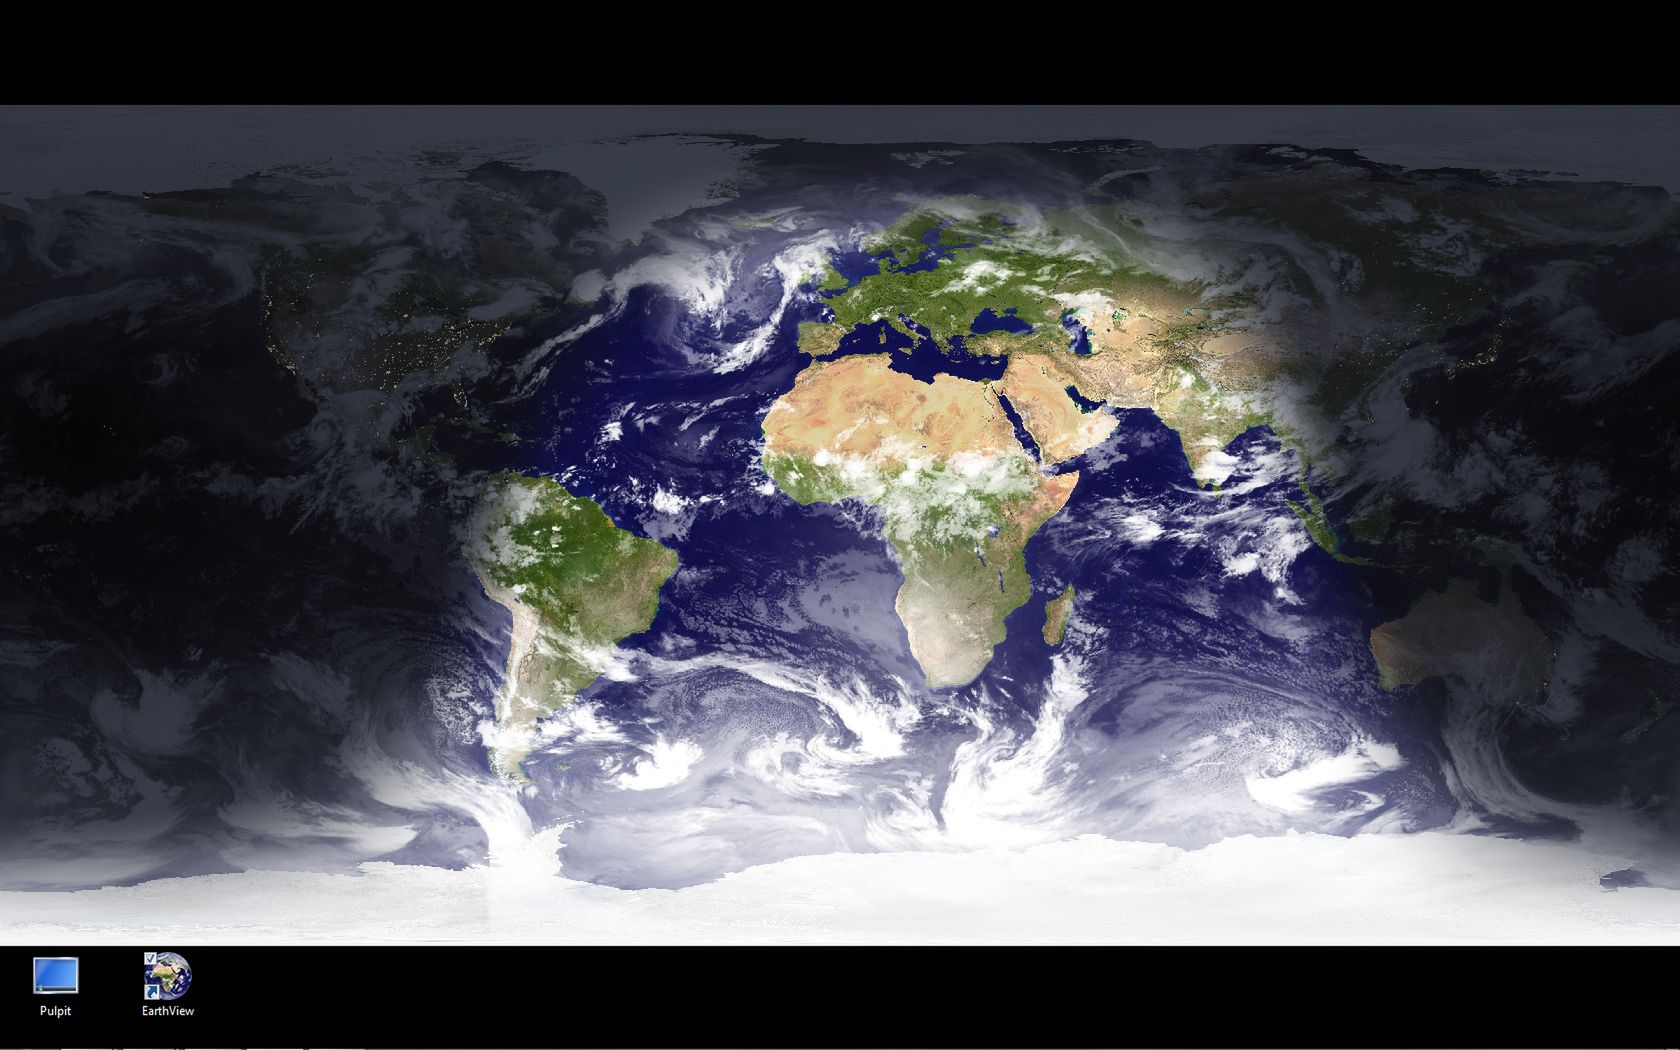 EarthView 7.7.5 for windows download